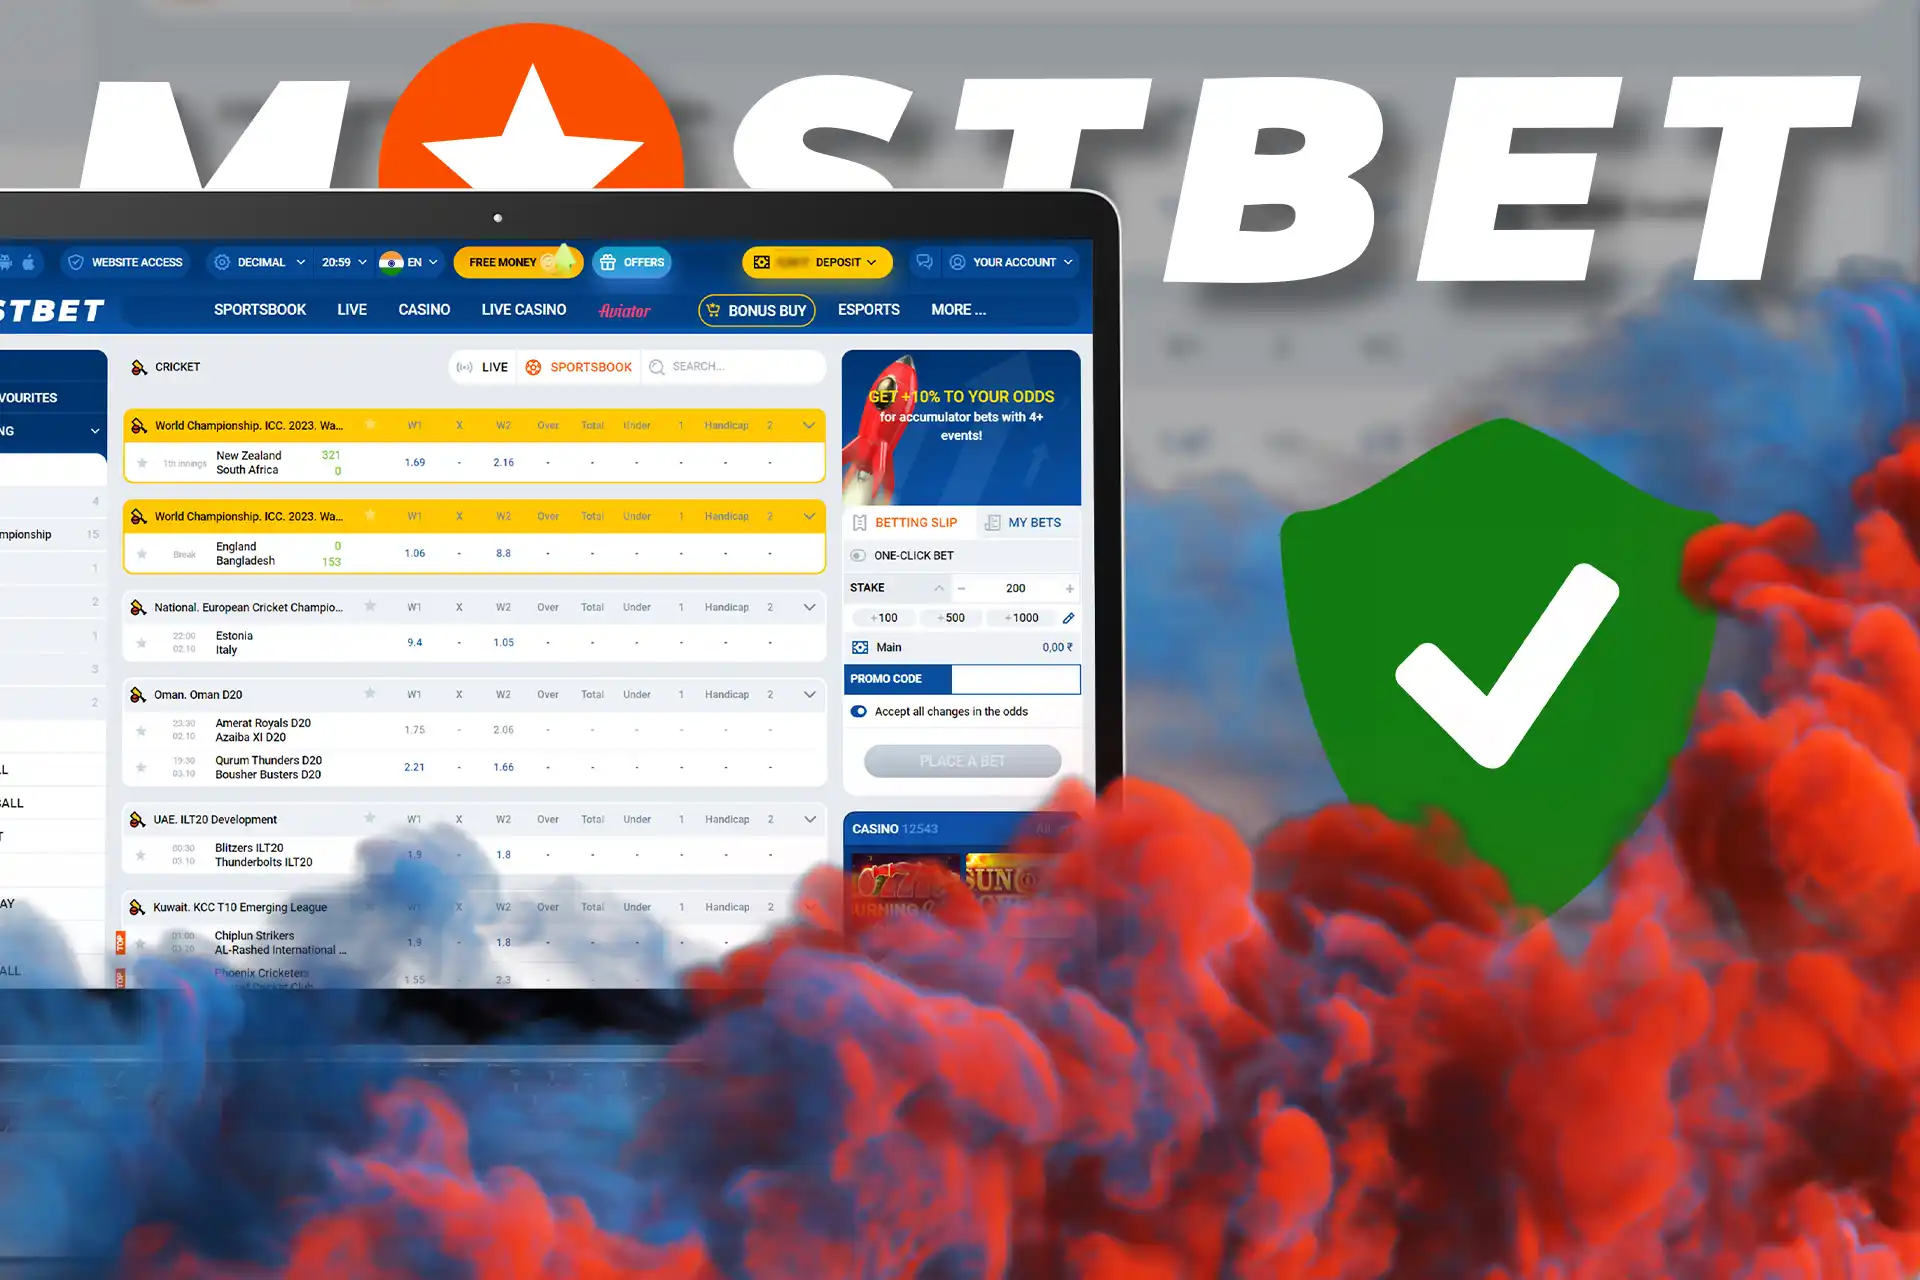 Mostbet is safe for players, all personal data will be safe and secure.